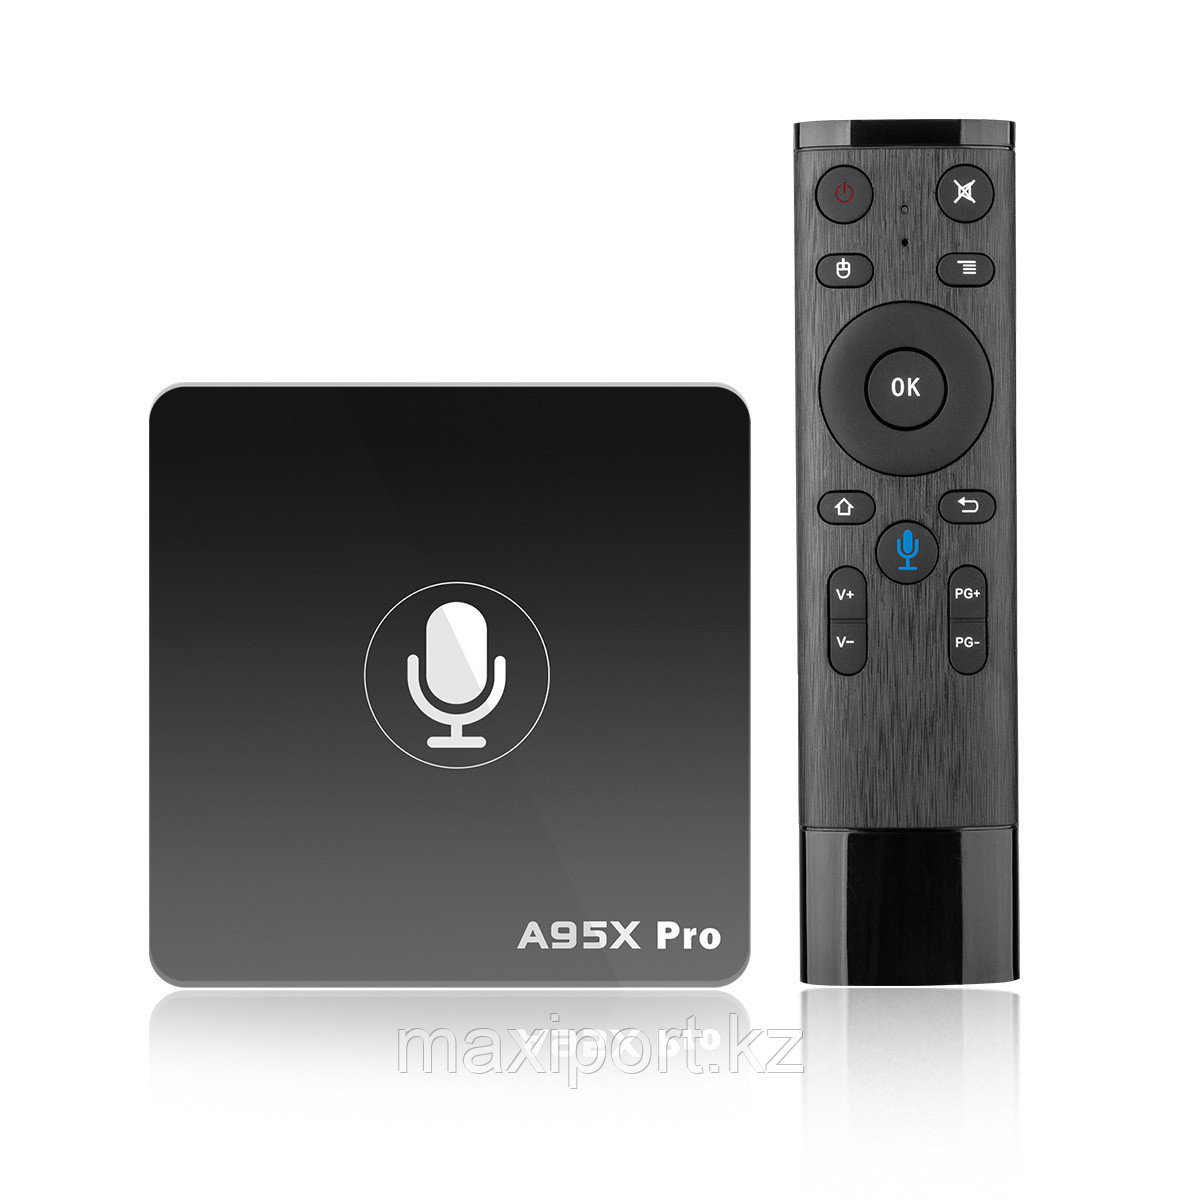 Android Tv Box A95X - фото 2 - id-p71170908